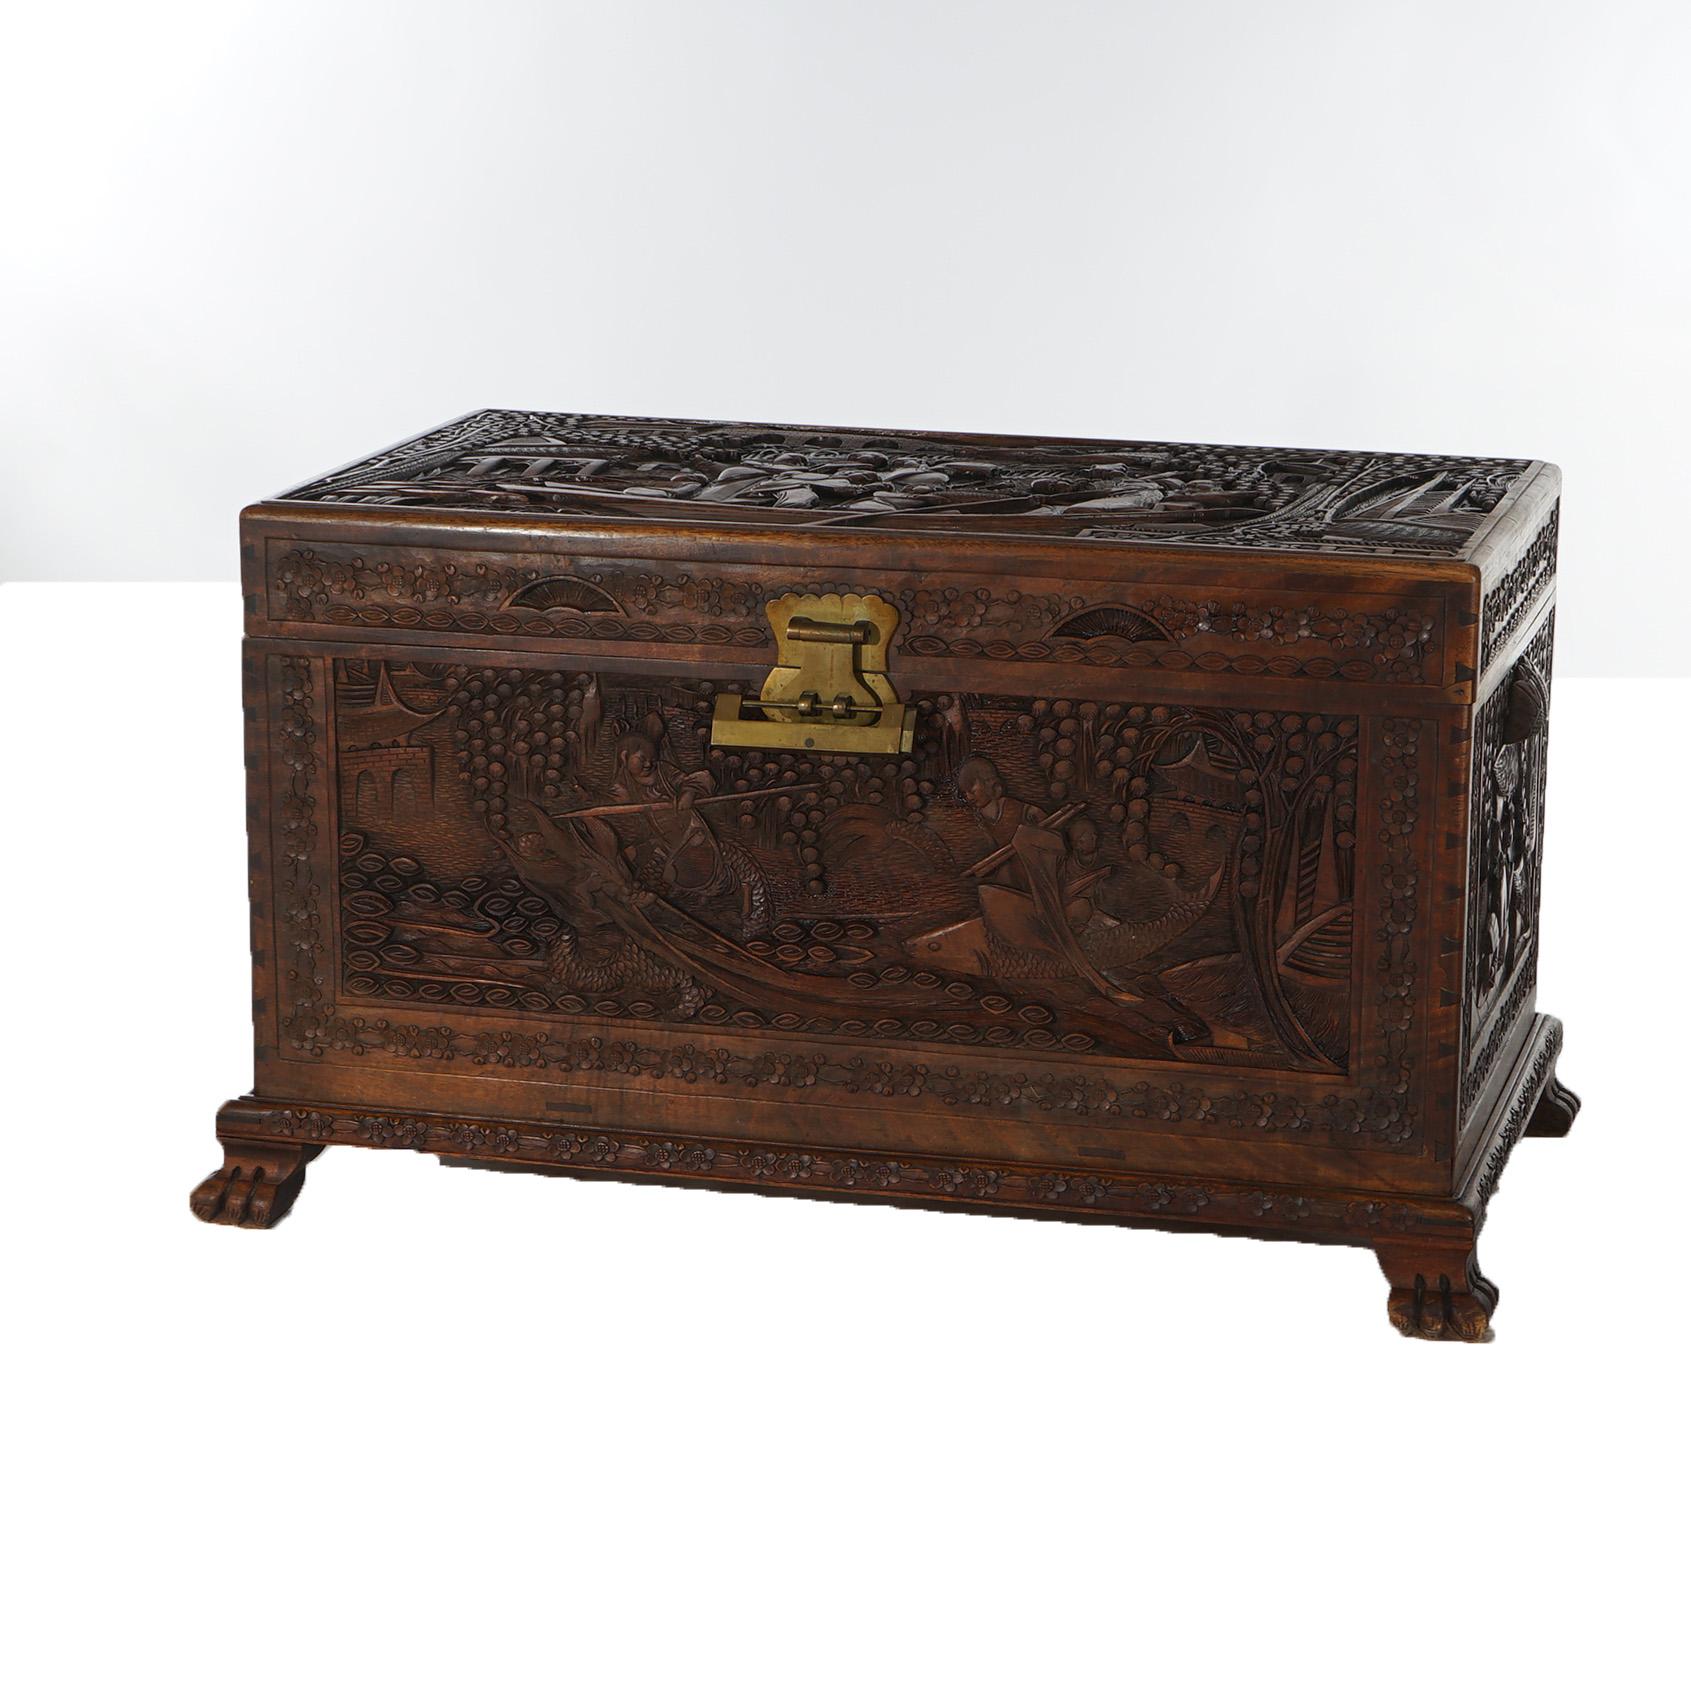 Antique Chinese Hardwood Carved in Relief Chinoiserie Blanket Chest Chest C1920 For Sale 1